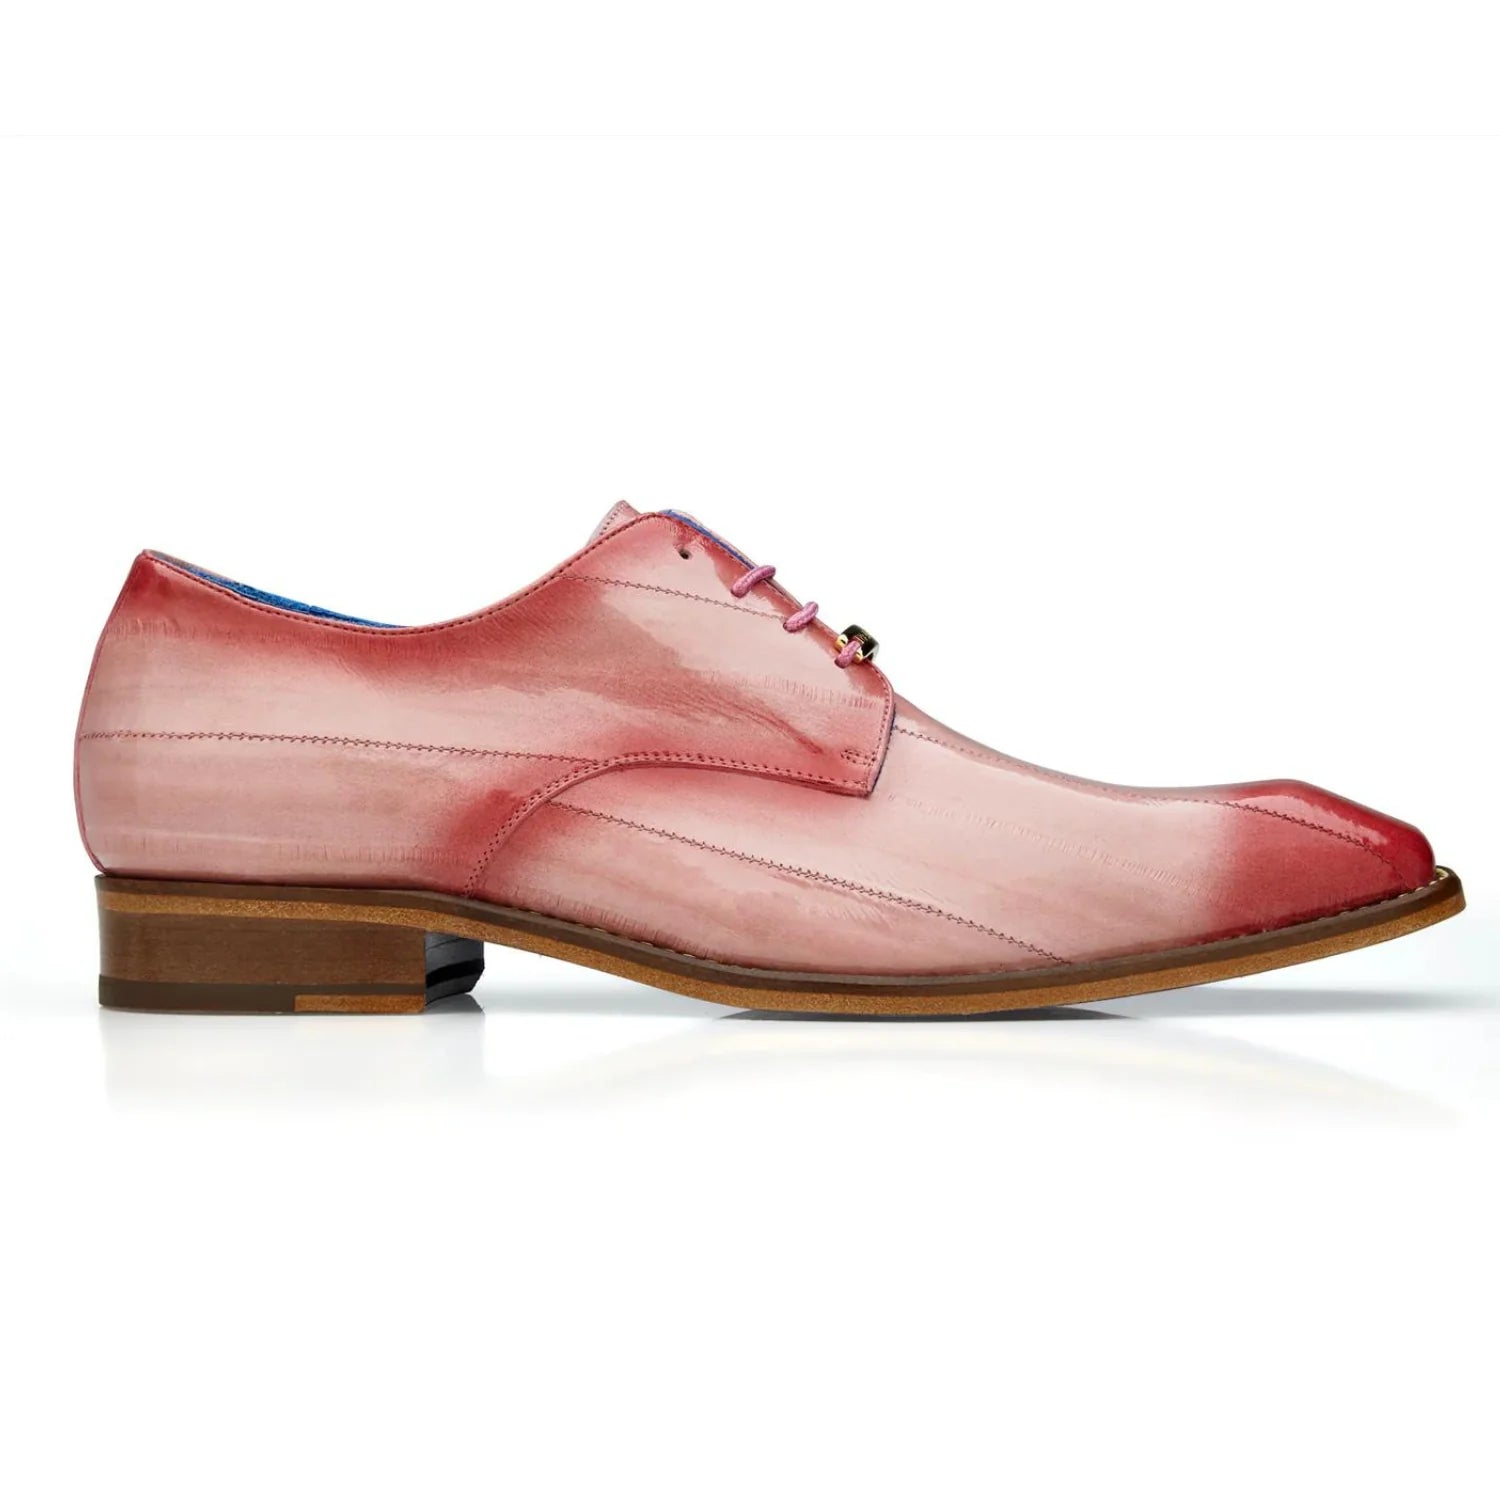 A Belvedere leather shoe in antique pink.